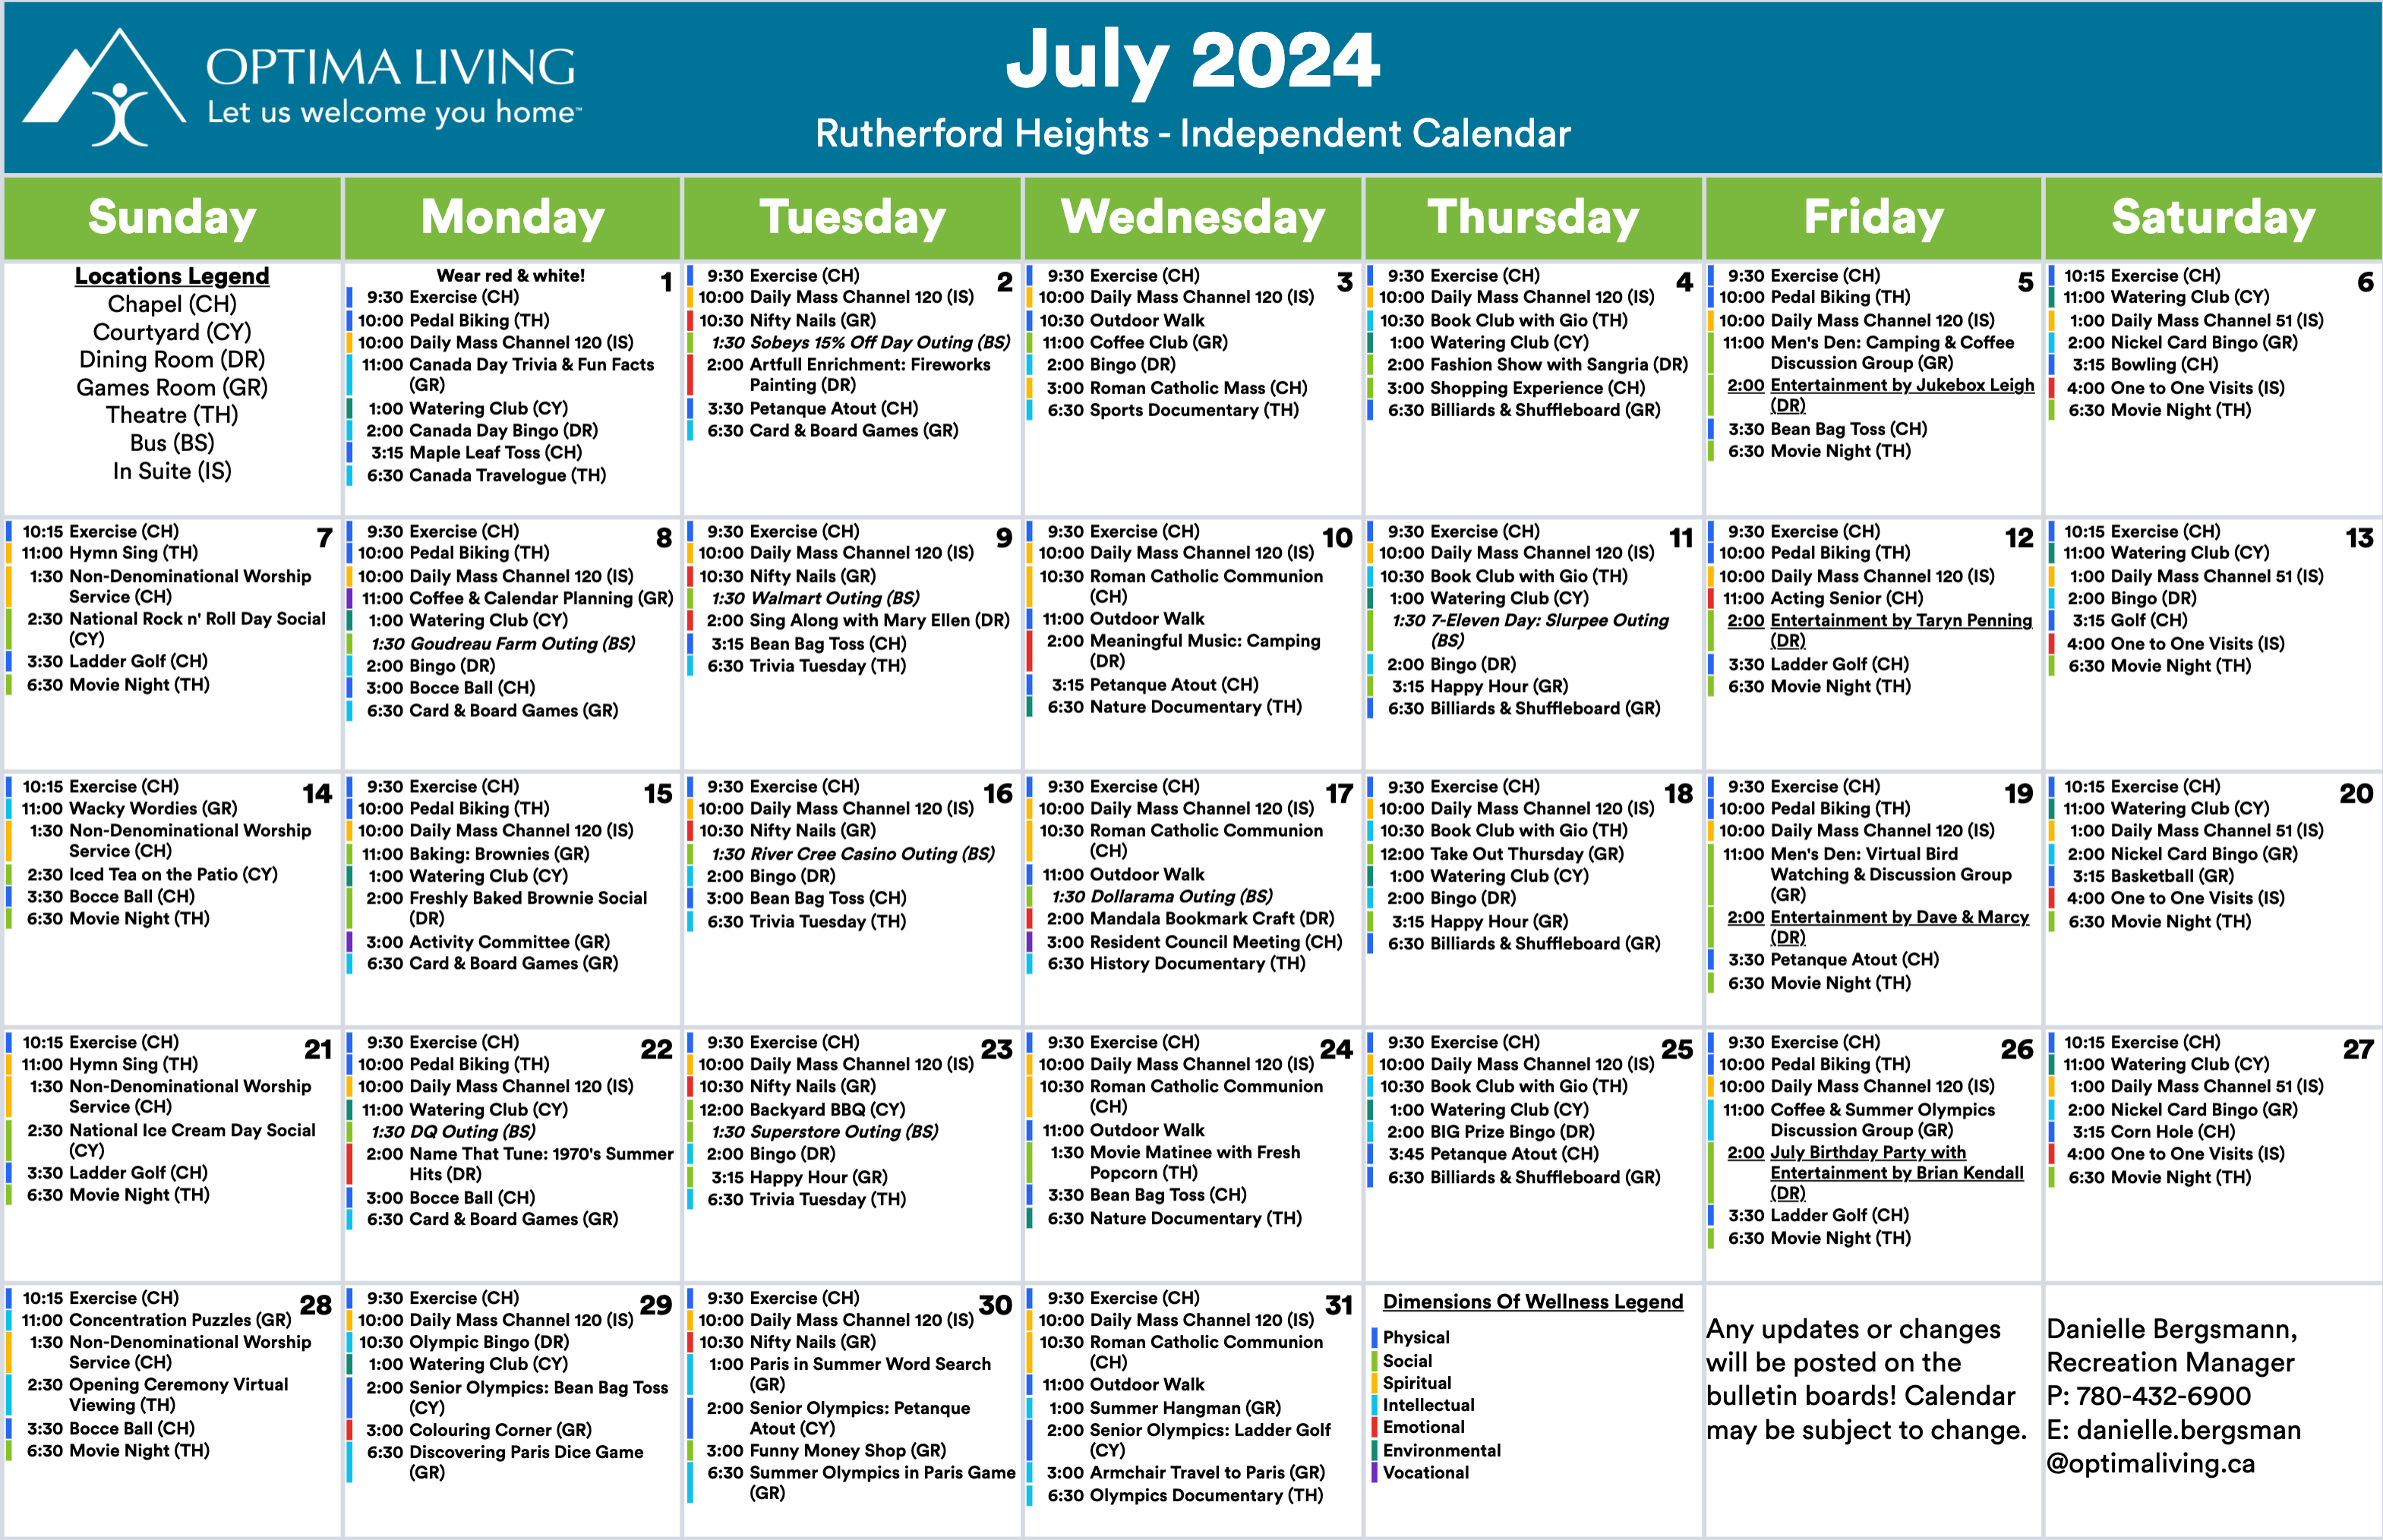 Rutherford Heights July 2024 event calendar